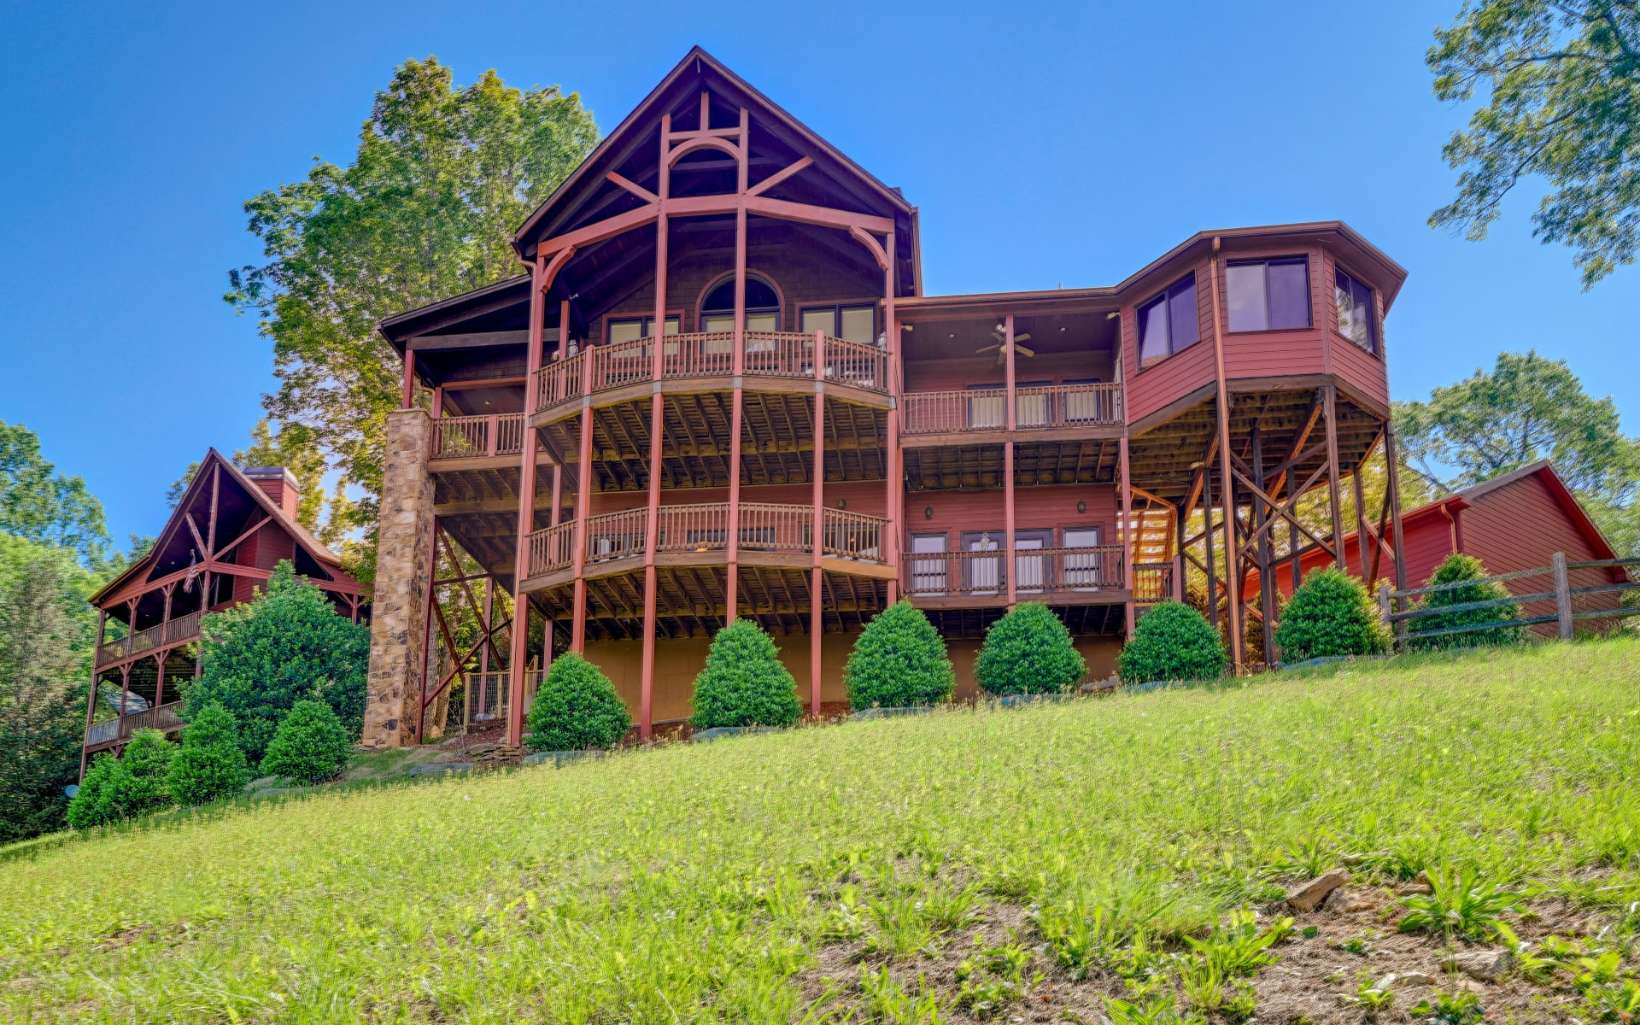 What fantastic lake and mountain views from this gorgeous mountain home! Over 4,000 sq. ft. of immaculate living space on two levels of mountain beauty overlooking Hiawassee, Lake Chatuge and Brasstown Bald. Take a look at the pictures to appreciate everything this home has to offer. End of the road privacy only 2.5 miles from downtown Hiawassee and 1.5 miles from Lake Chatuge.